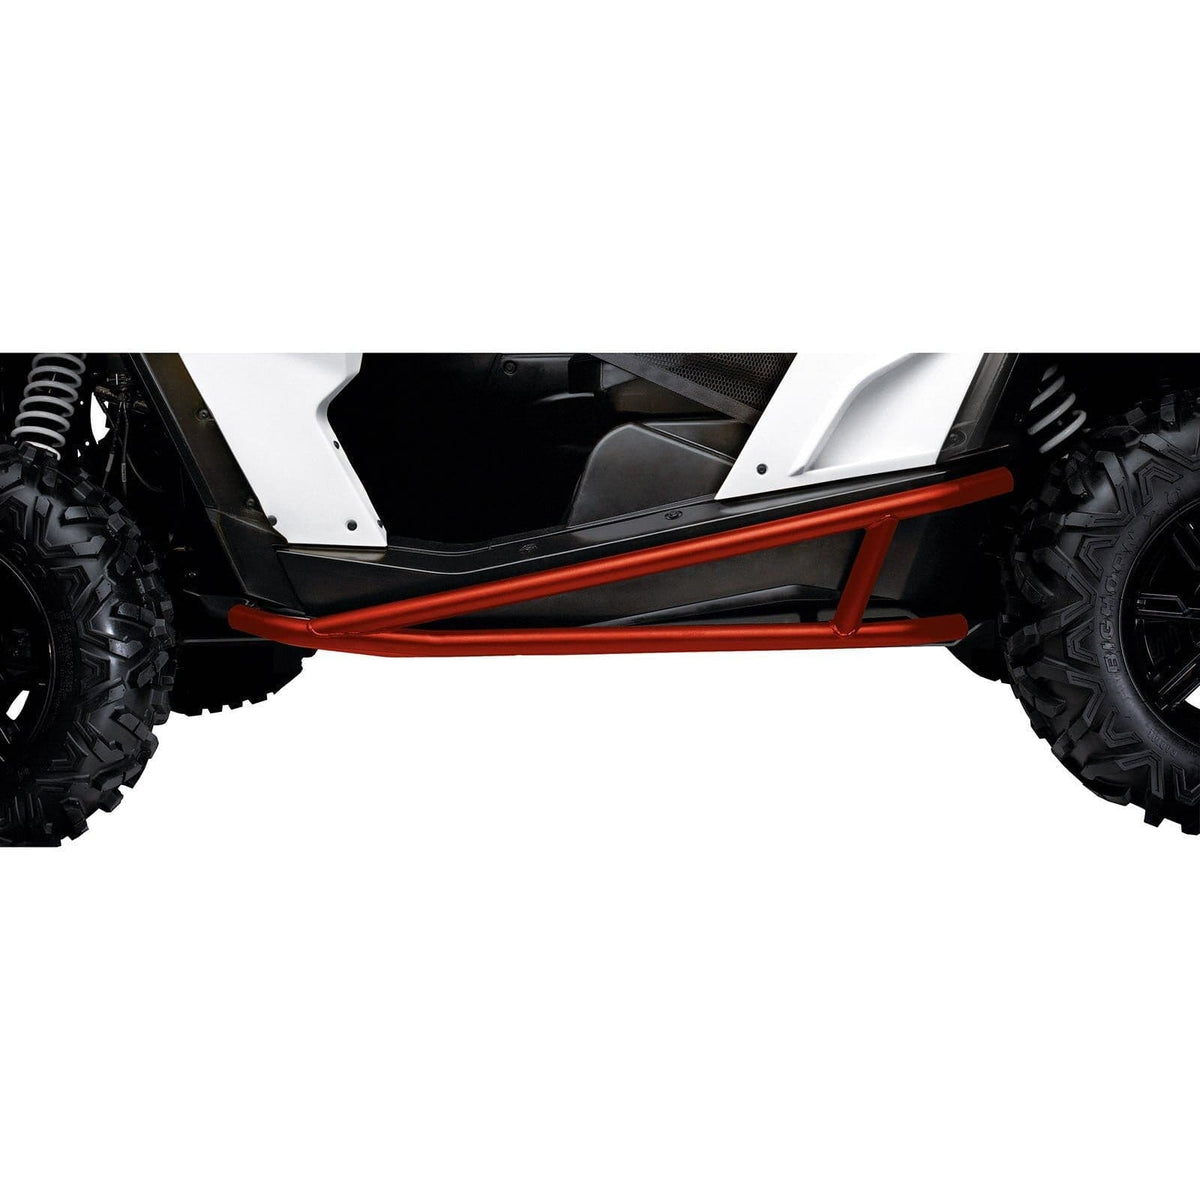 Rock Sliders / Can-Am Red